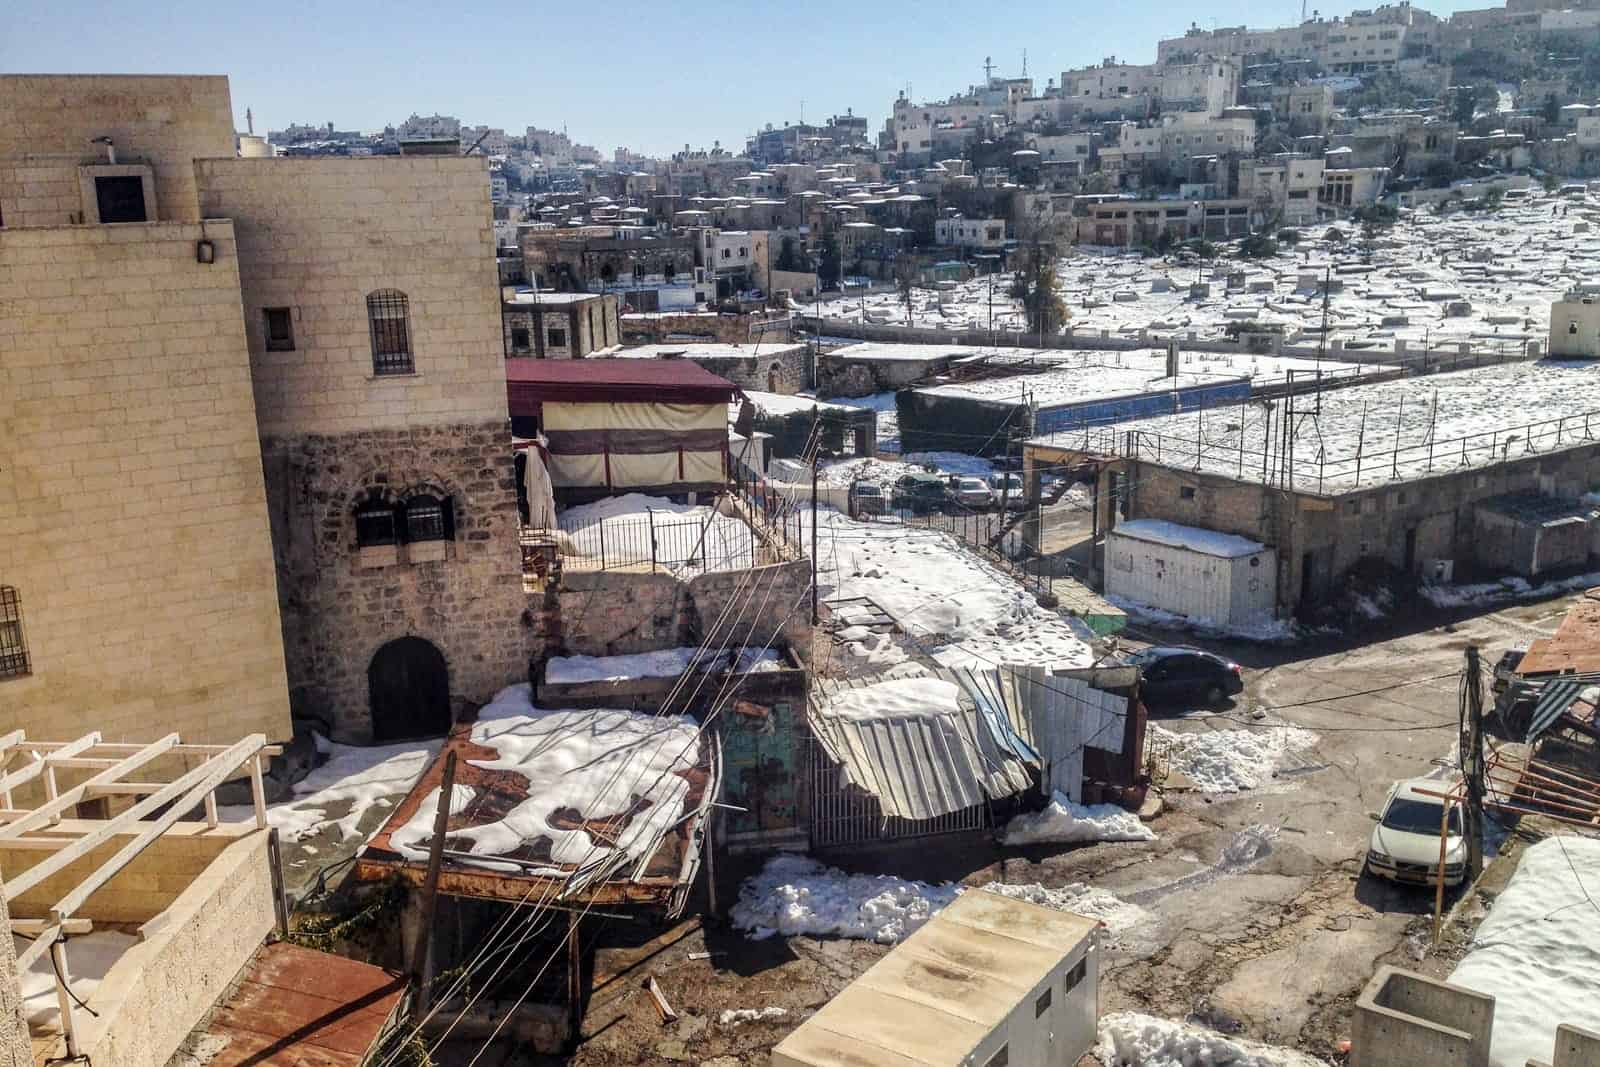 The divided city of Hebron in the West Bank